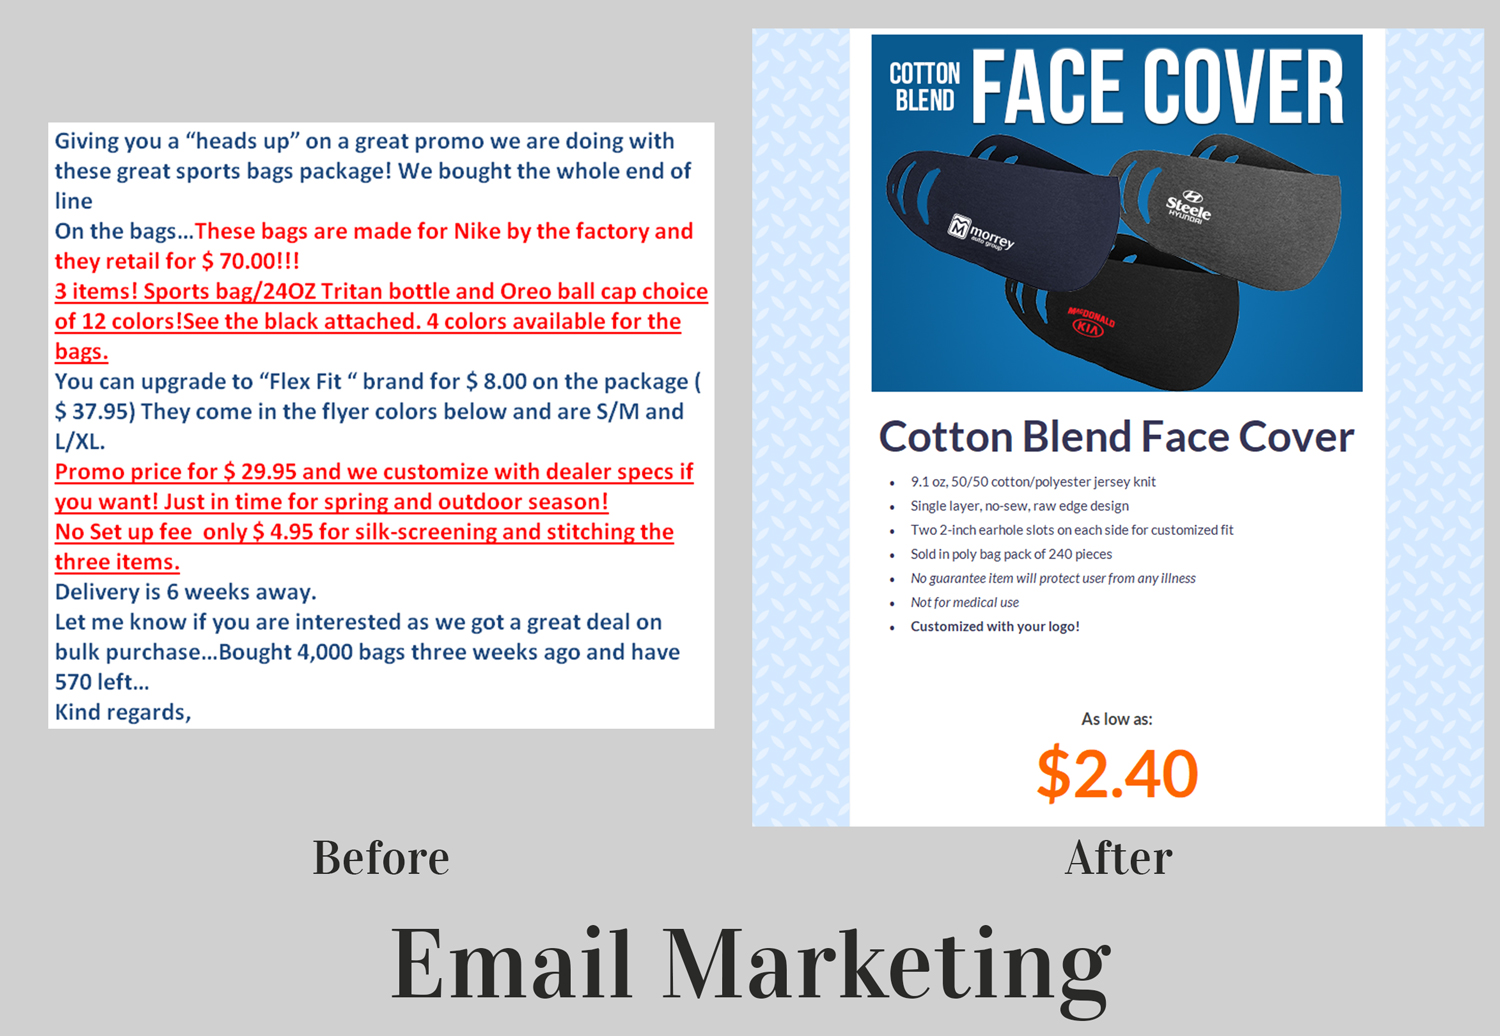 Email Marketing before & after